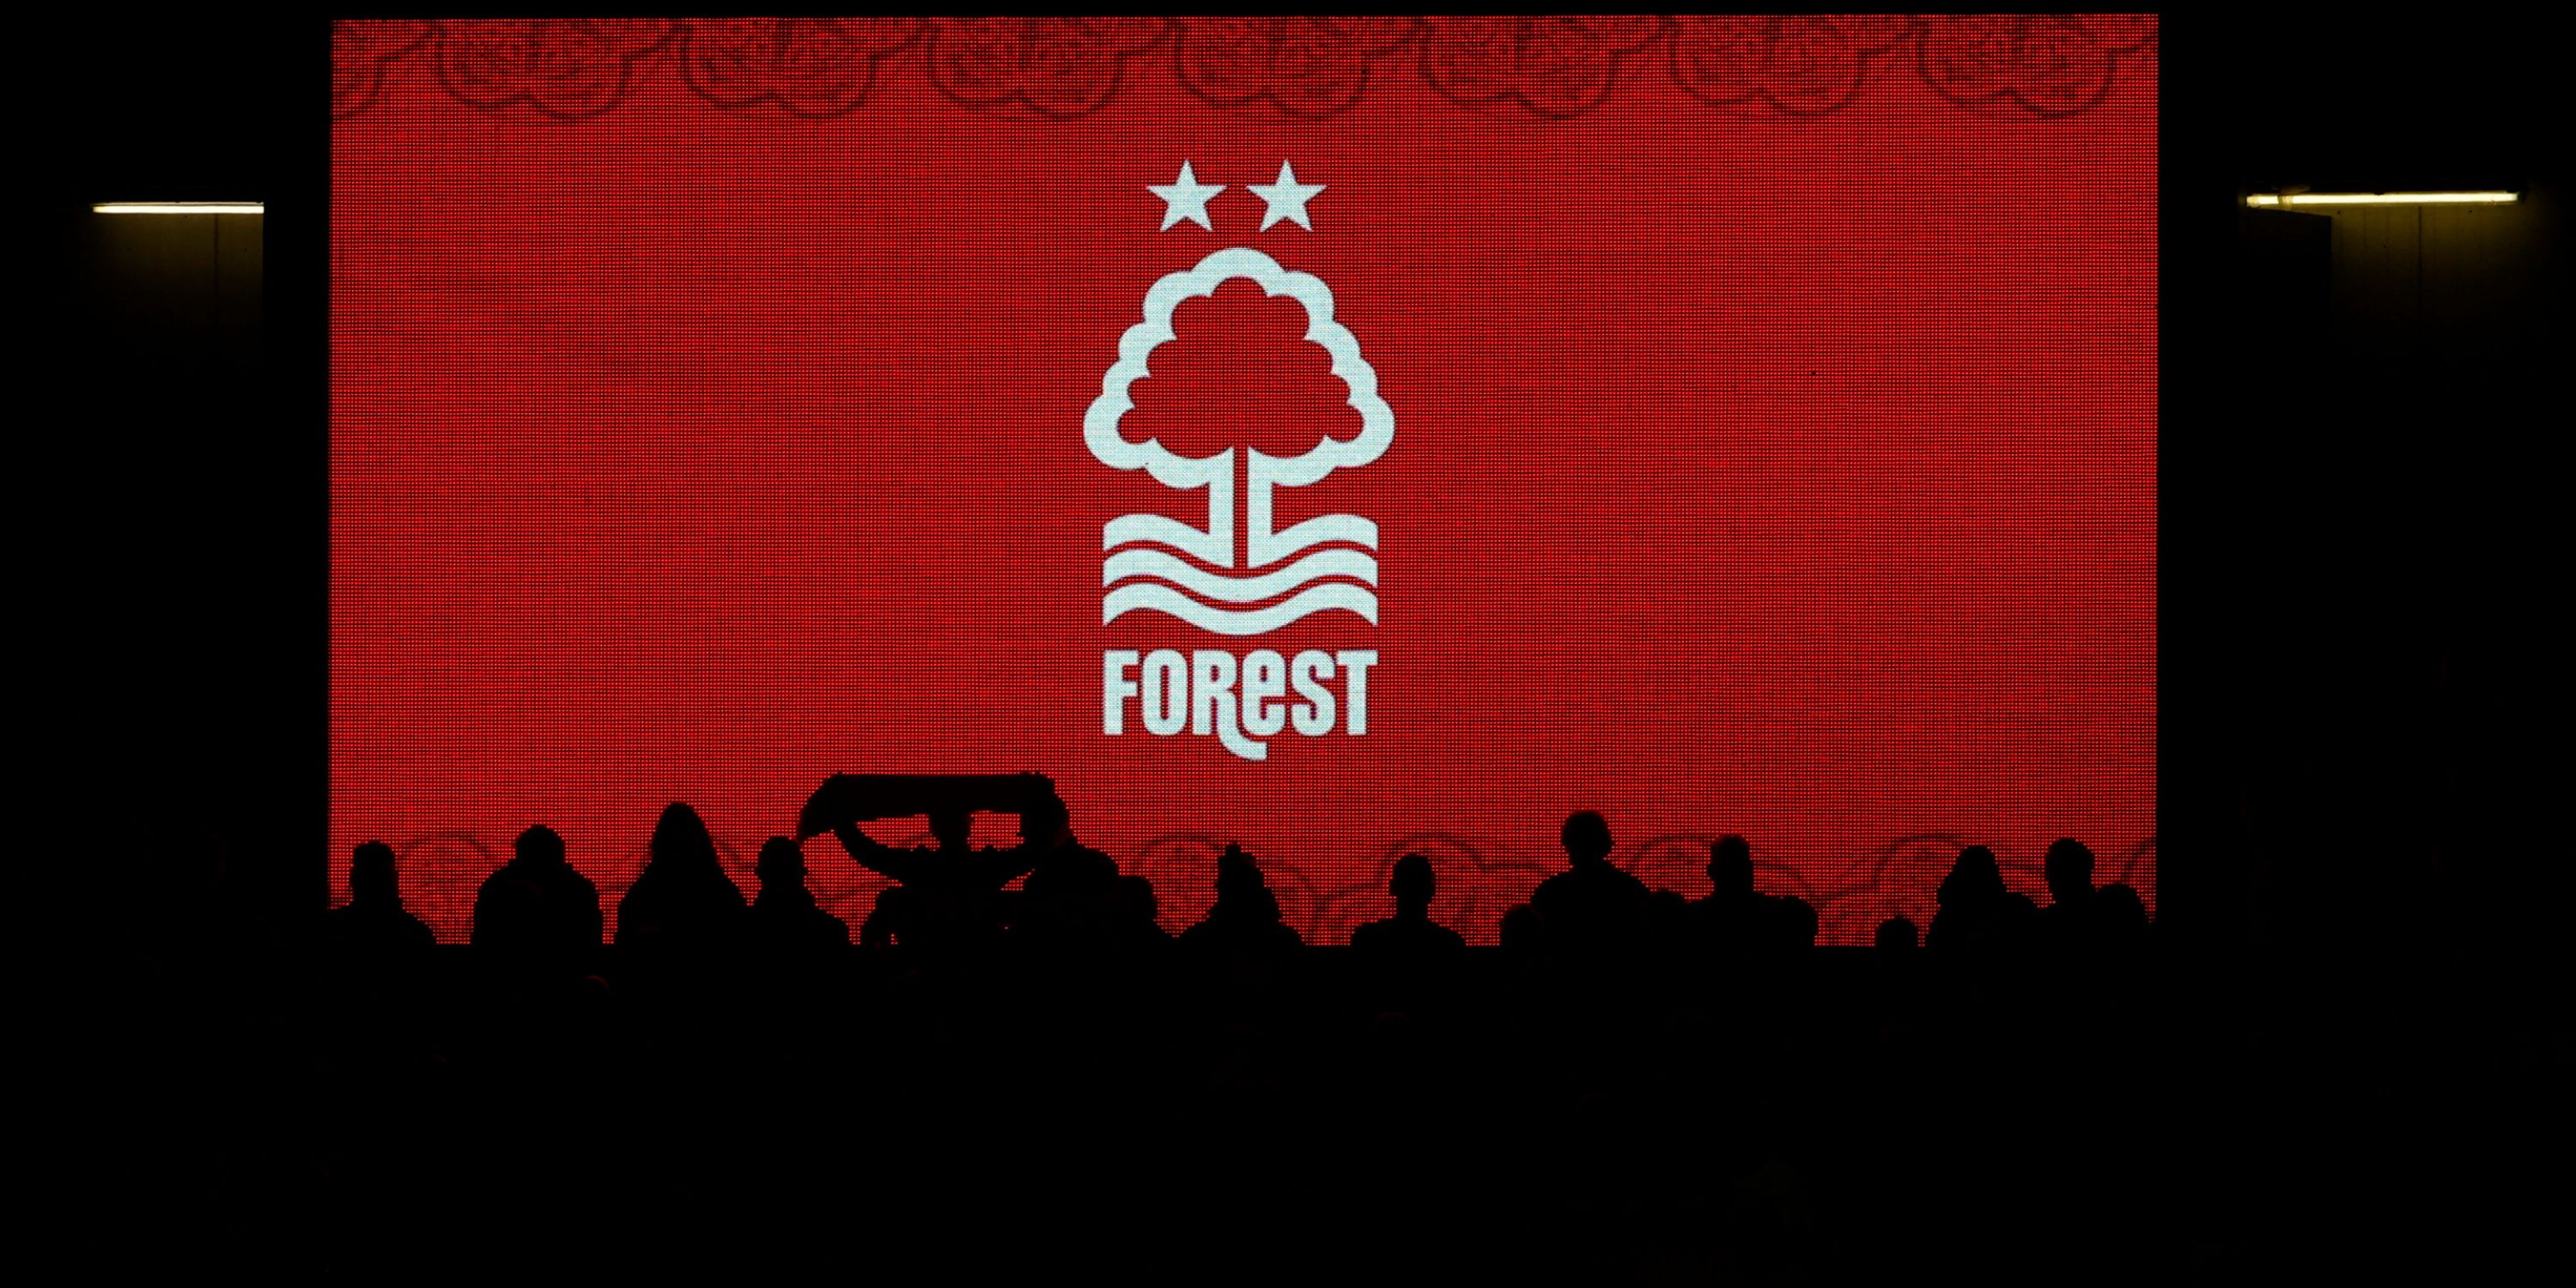 Nottingham Forest's badge on a big screen